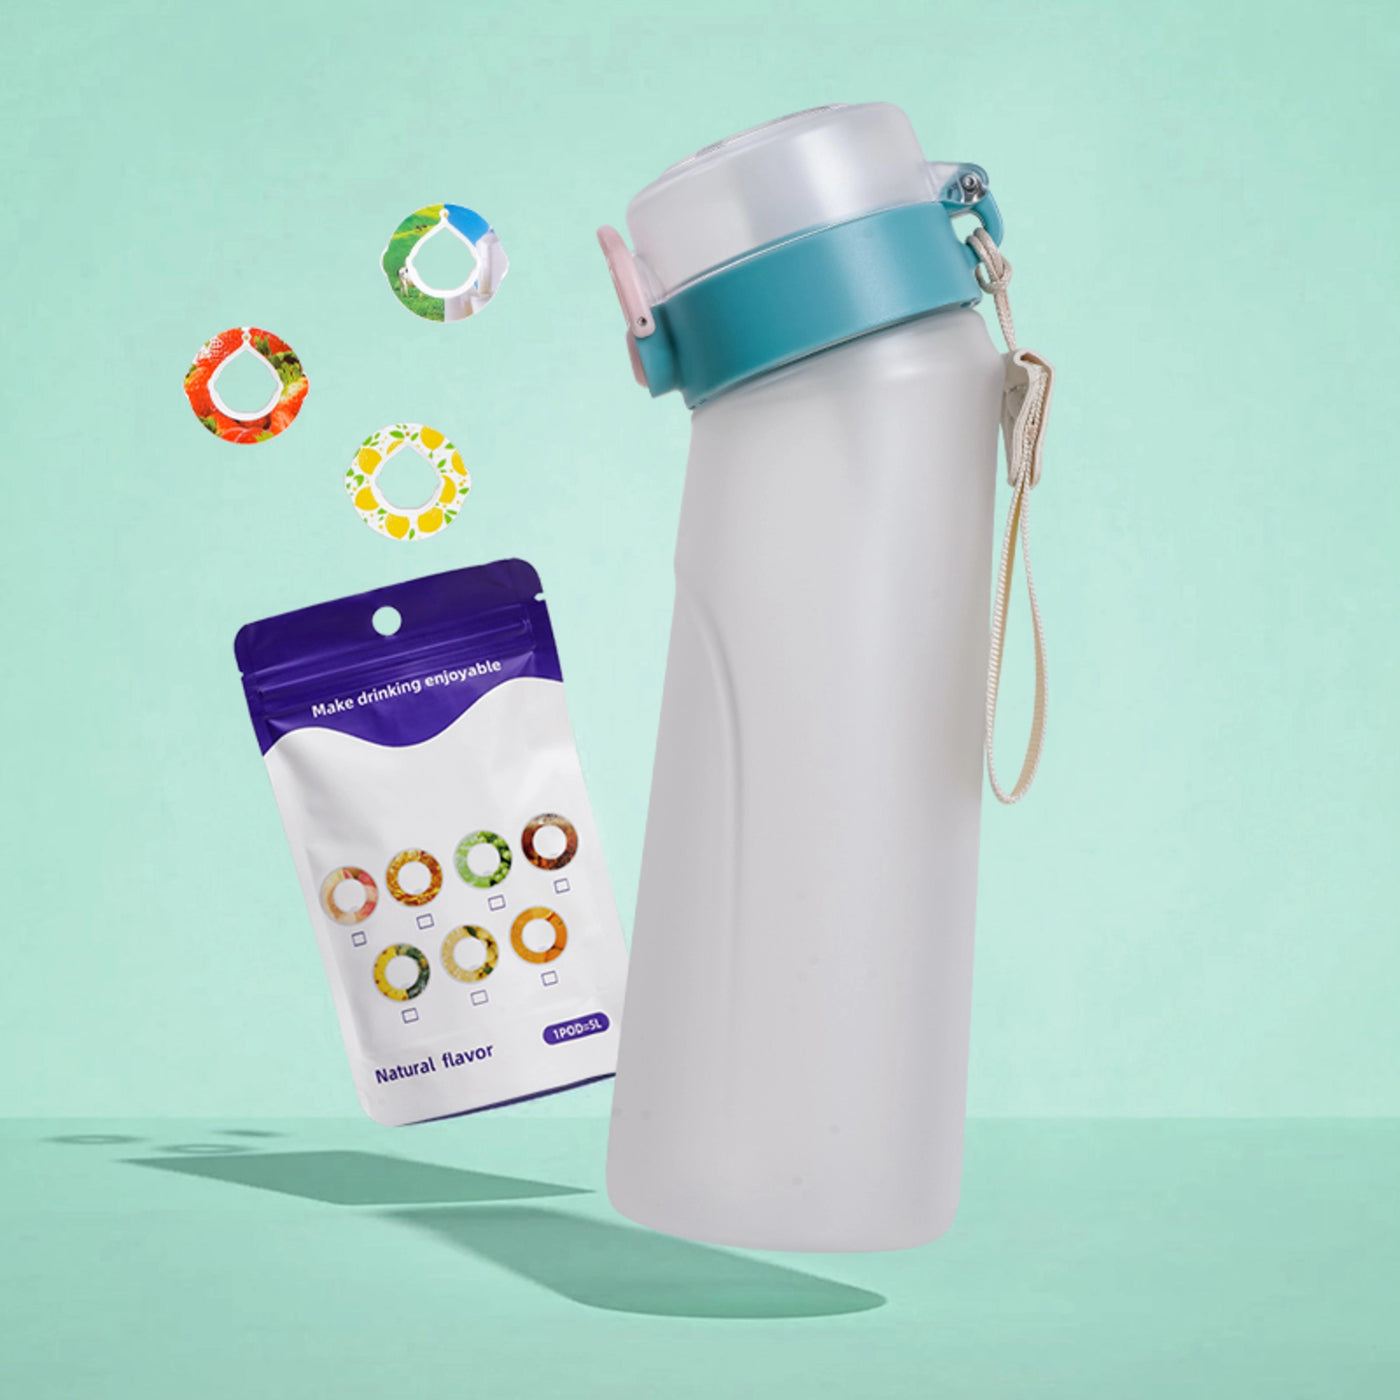 Quench your thirst with the exceptional flavored water bottle best that air-up